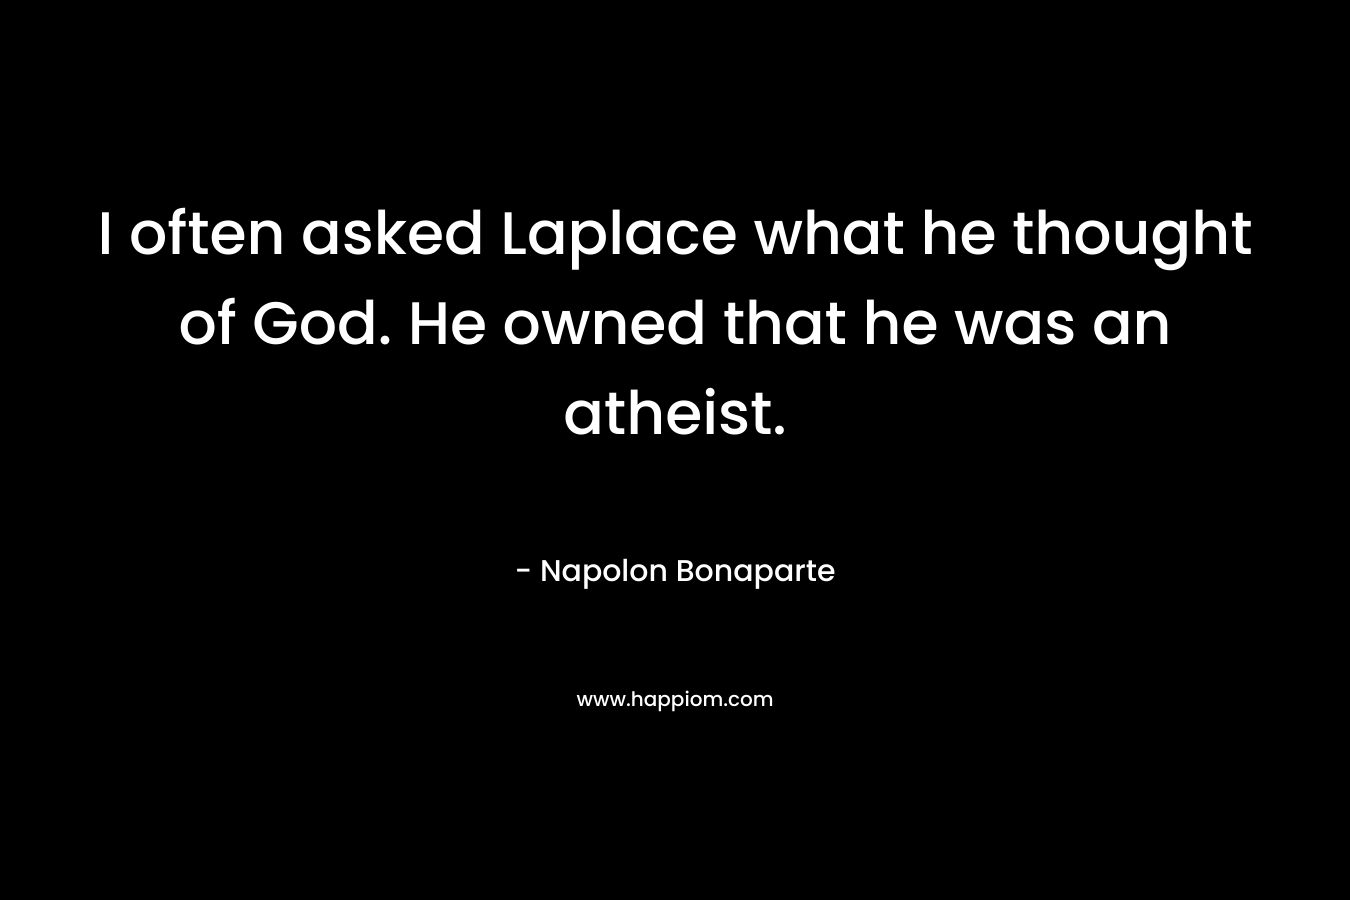 I often asked Laplace what he thought of God. He owned that he was an atheist. – Napolon Bonaparte